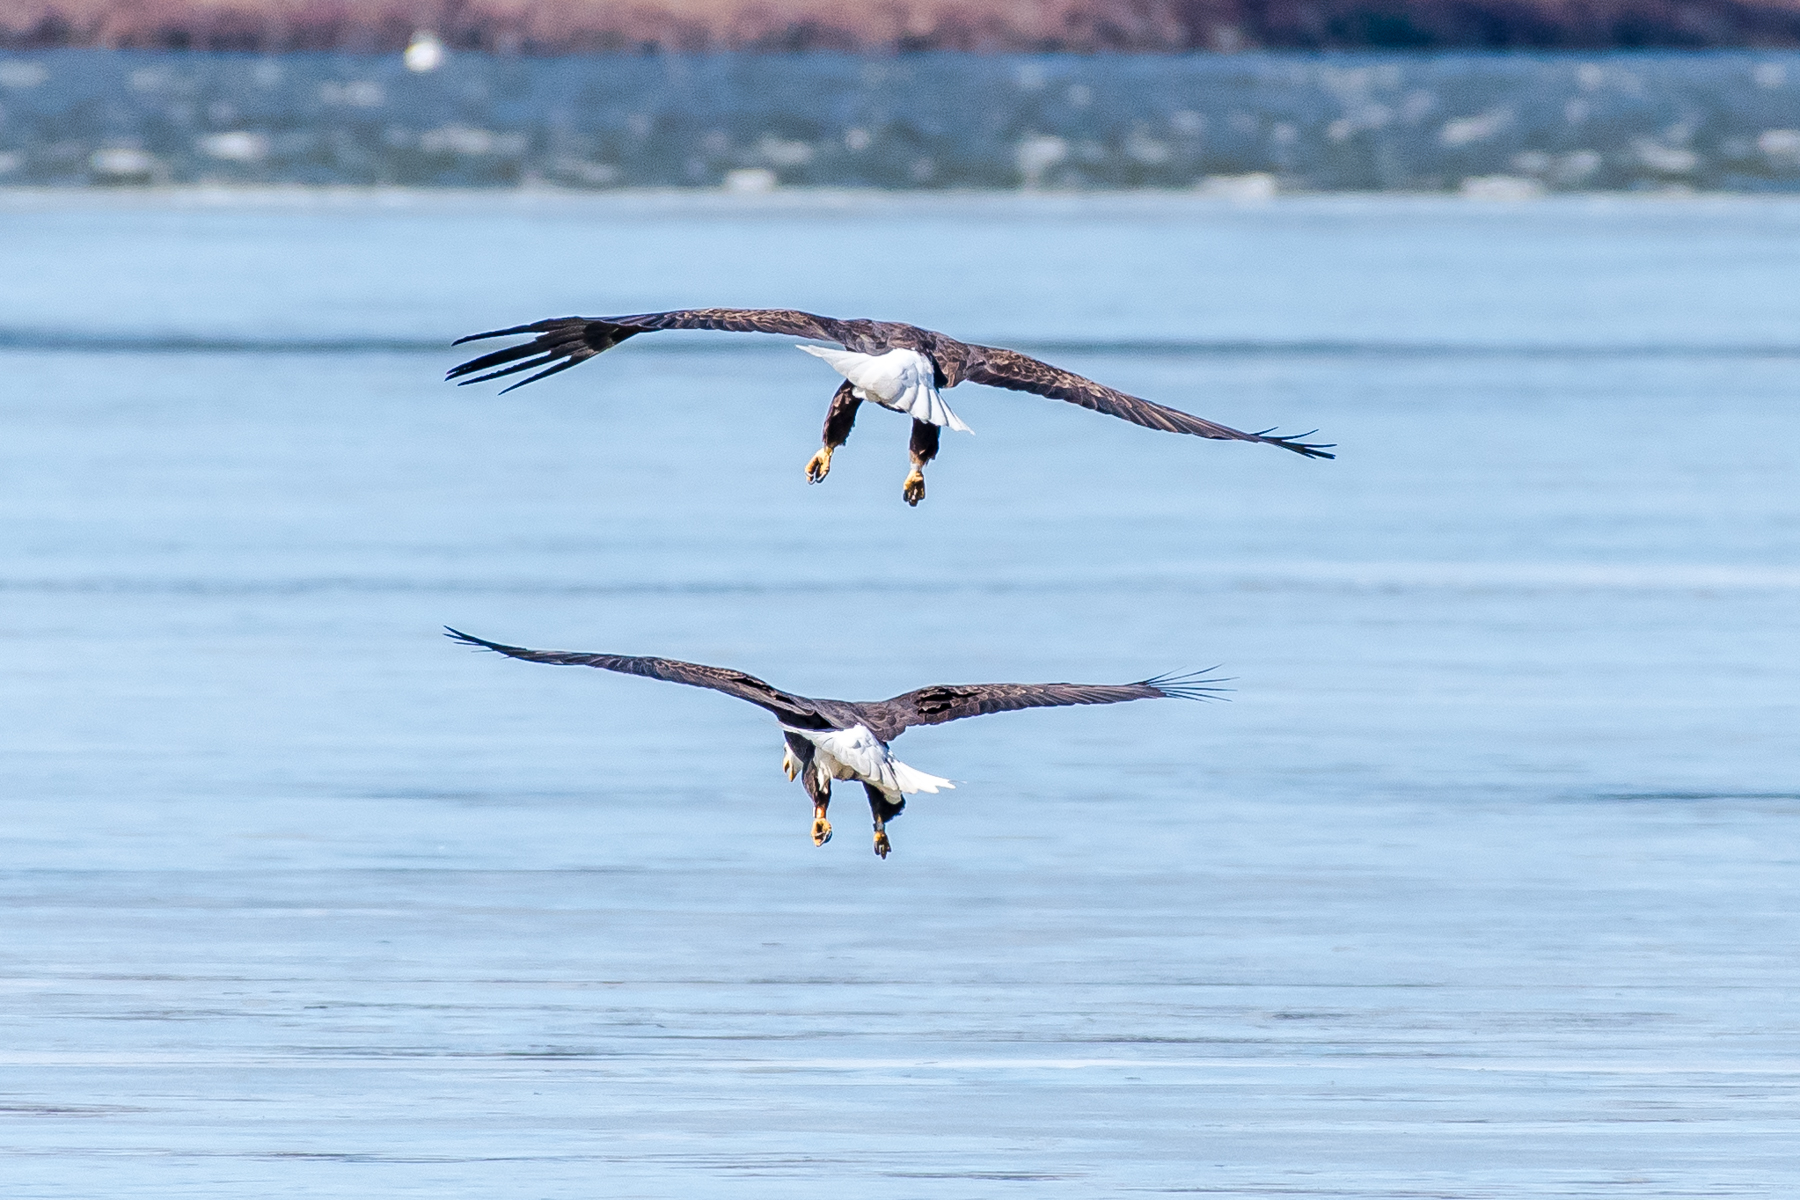   I was in Bartons Cove on the CT River this morning and this pair of eagles dropped in to say hi to me, at least thats what I thought. &nbsp;They then proceeded to do X rated things on the ice !! &nbsp;Eggs soon ! &nbsp;3/2/16  